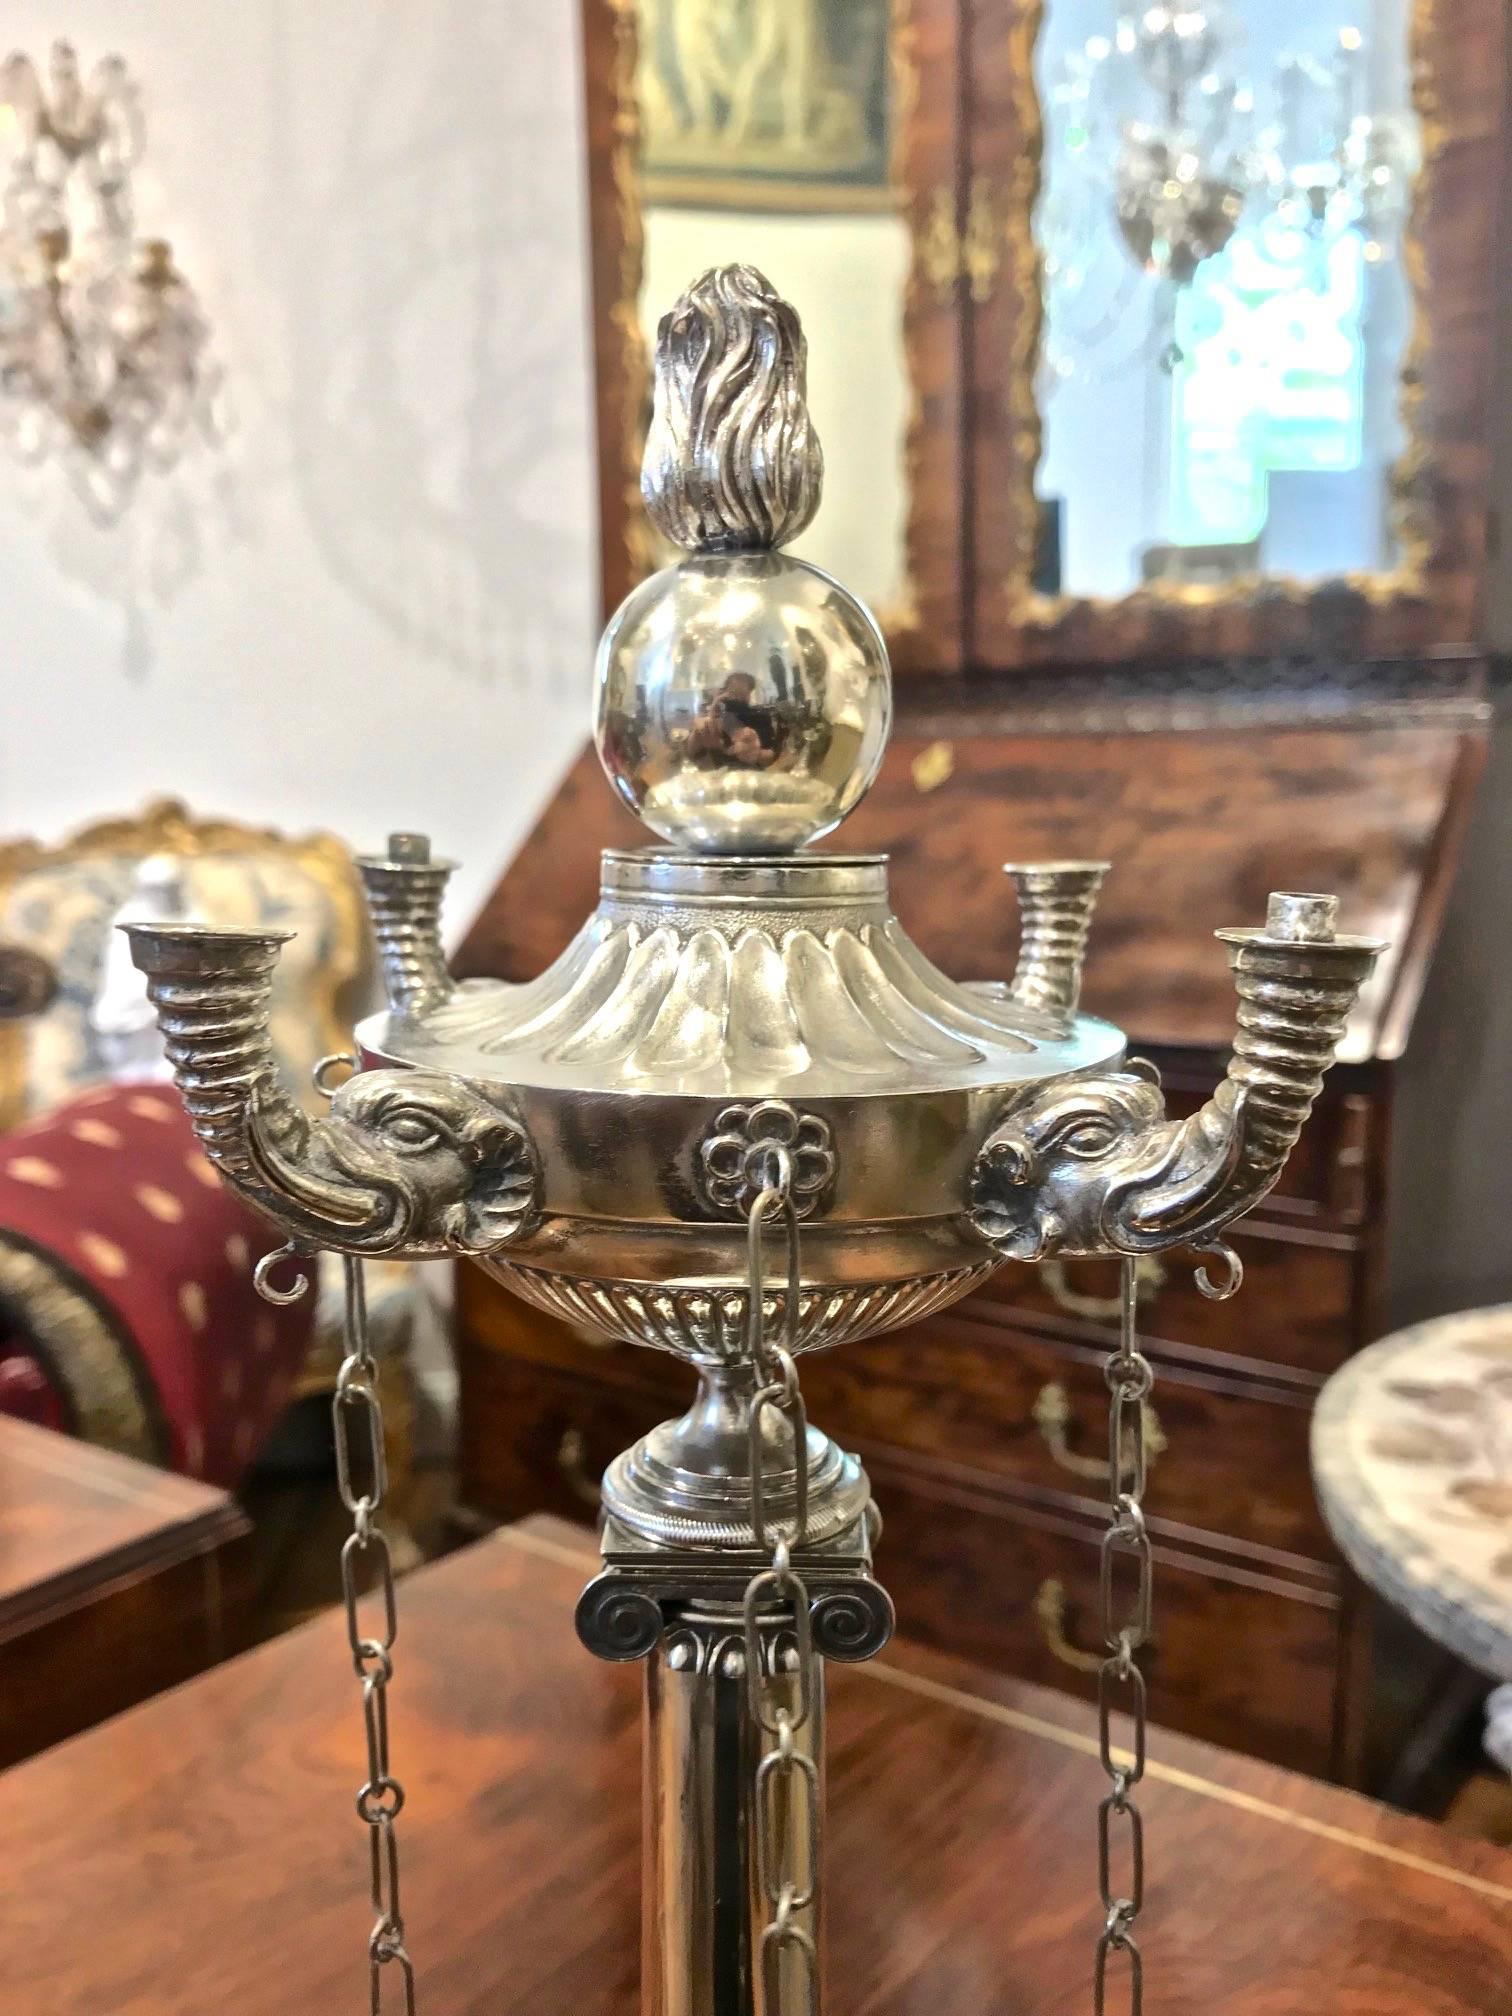 Period Indian silver oil lamp of neoclassical inspiration

--Early 19th century
--Original Throughout including wick tools and flame/ball finial
----heavily inspired by the Roman and Lucerne silver oil lamps of the late 18th and early